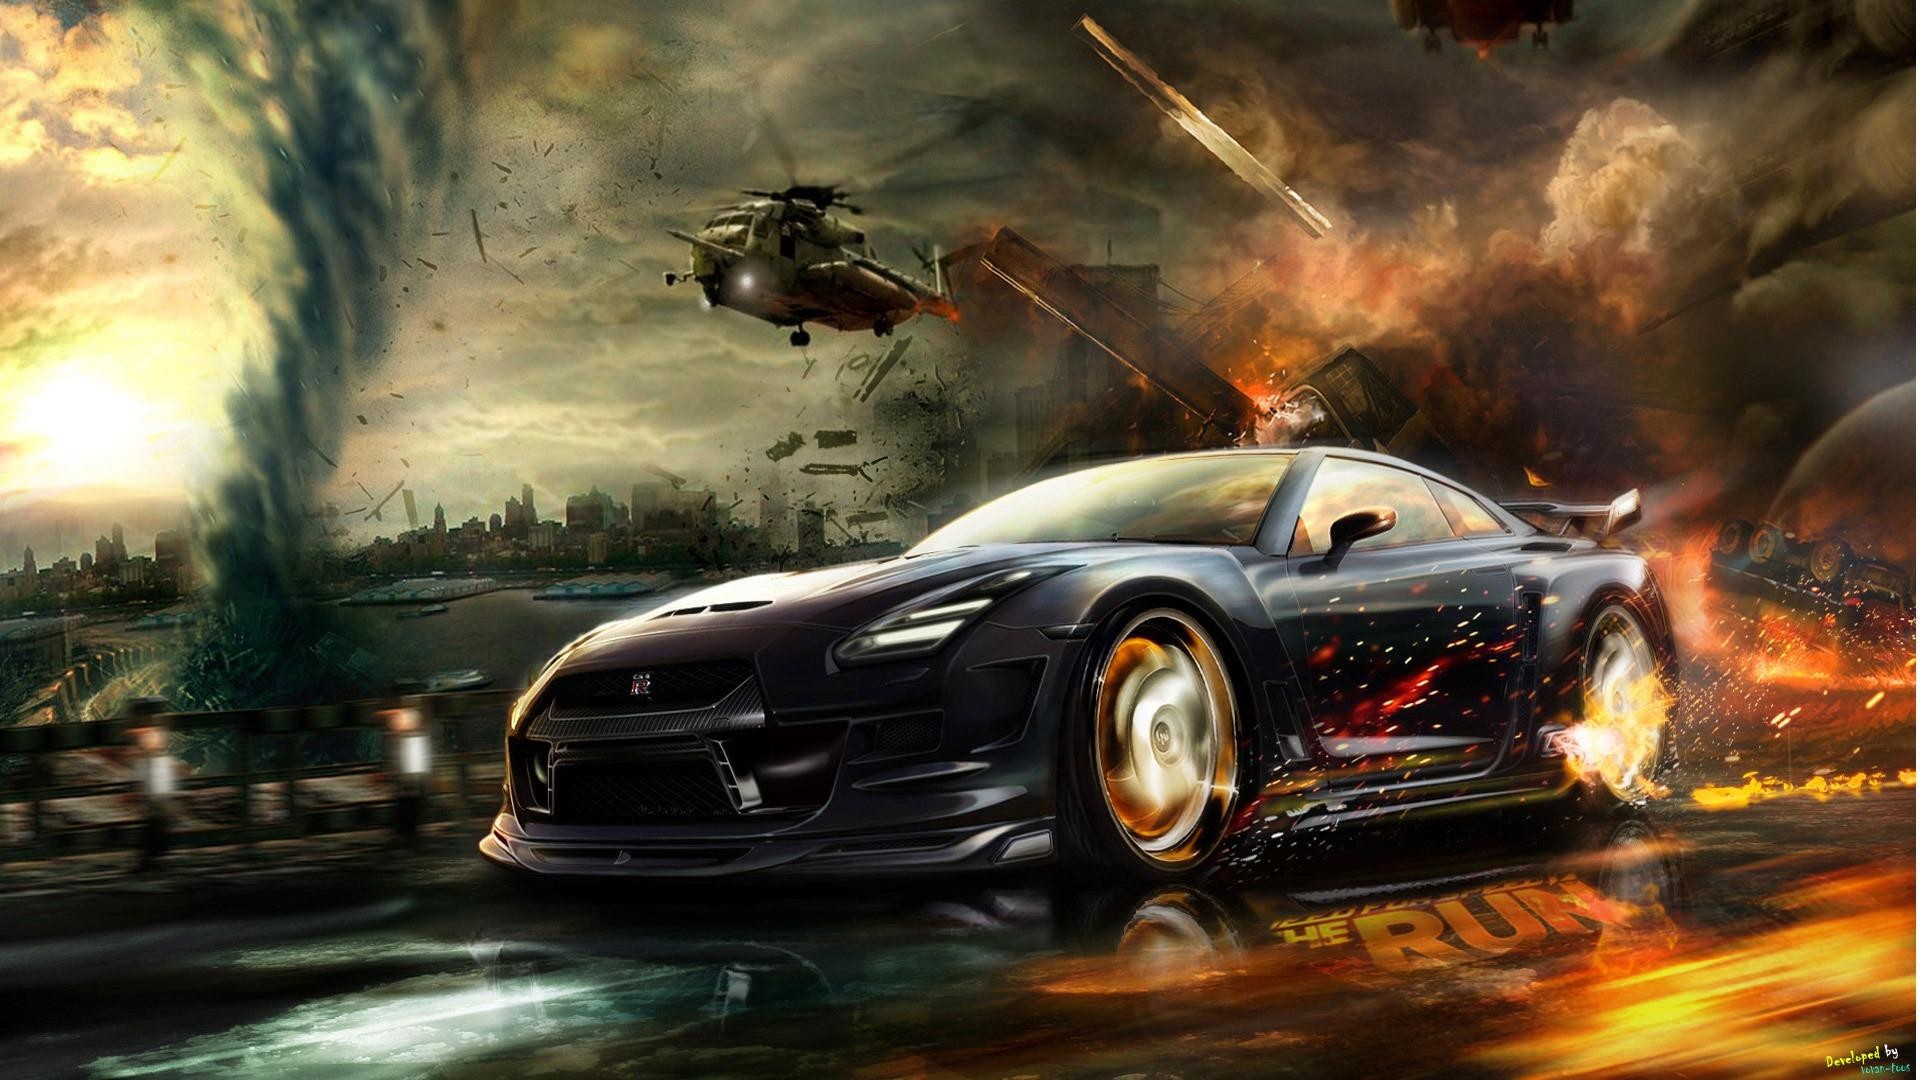 Wallpaper : nfs, Need for Speed, most wanted, Porsche, road, drift, trees  1600x1200 - CoolWallpapers - 739392 - HD Wallpapers - WallHere